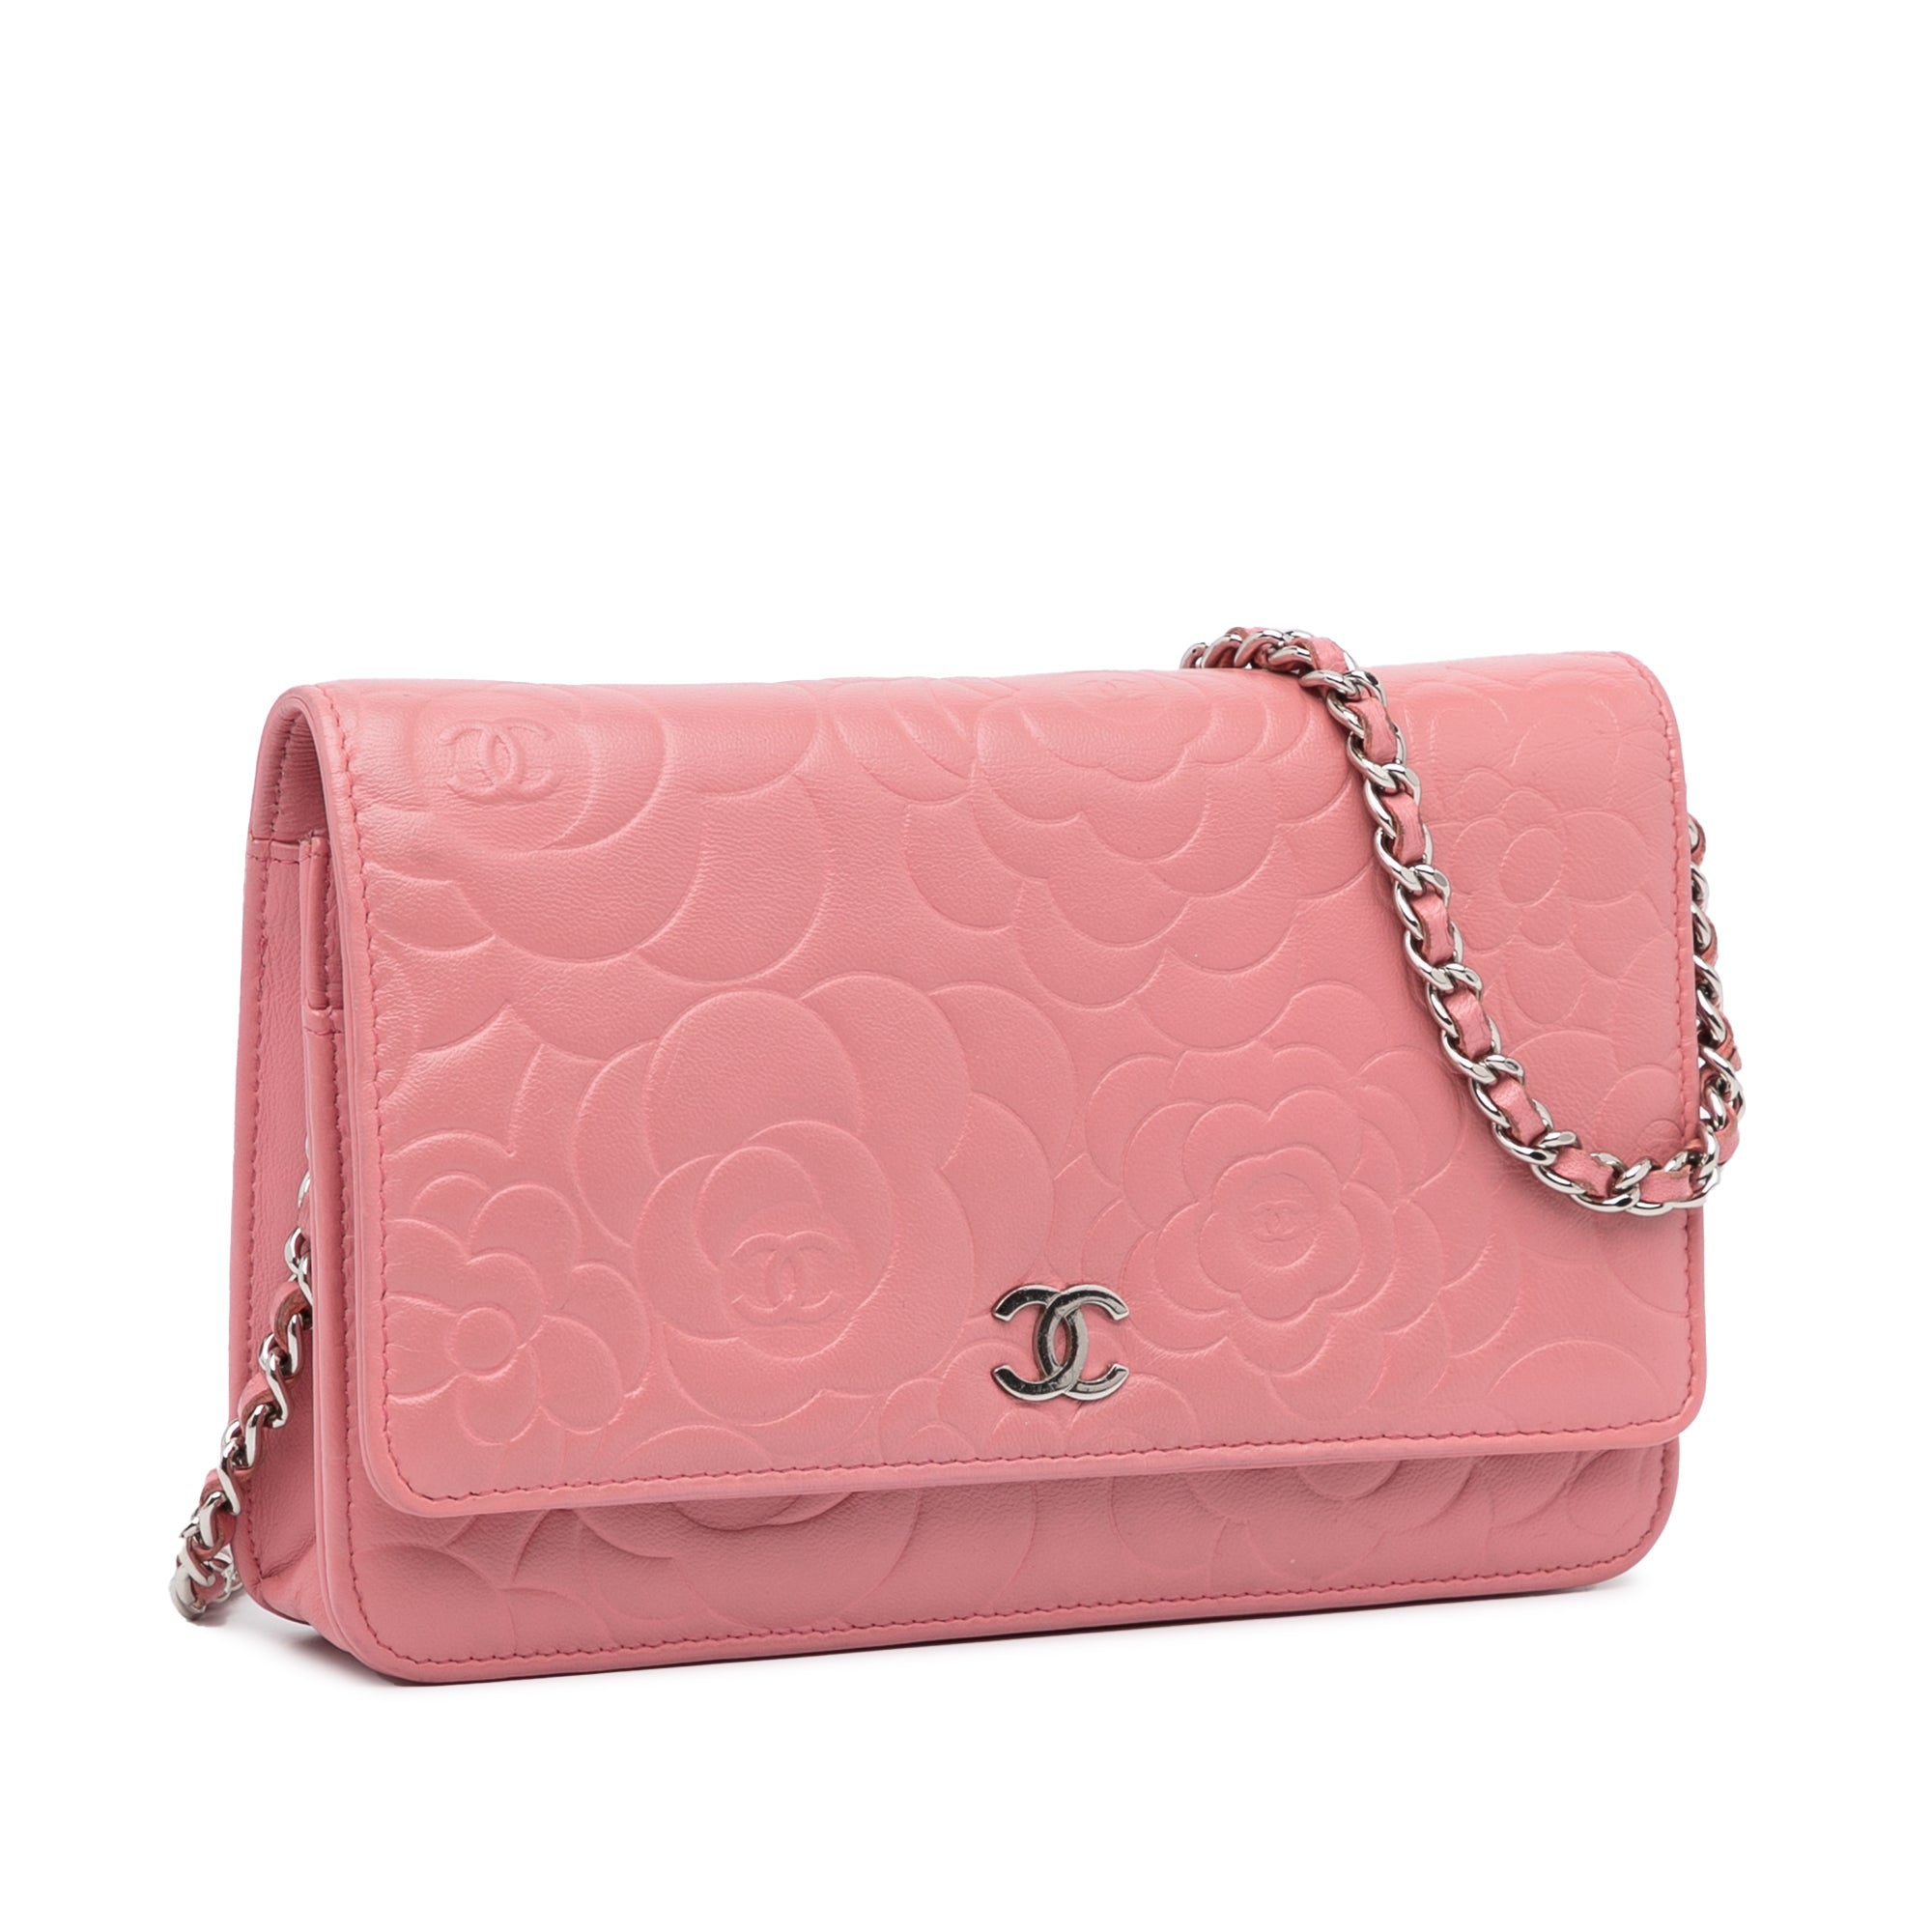 Chanel Woc Quilted Leather Crossbody Bag